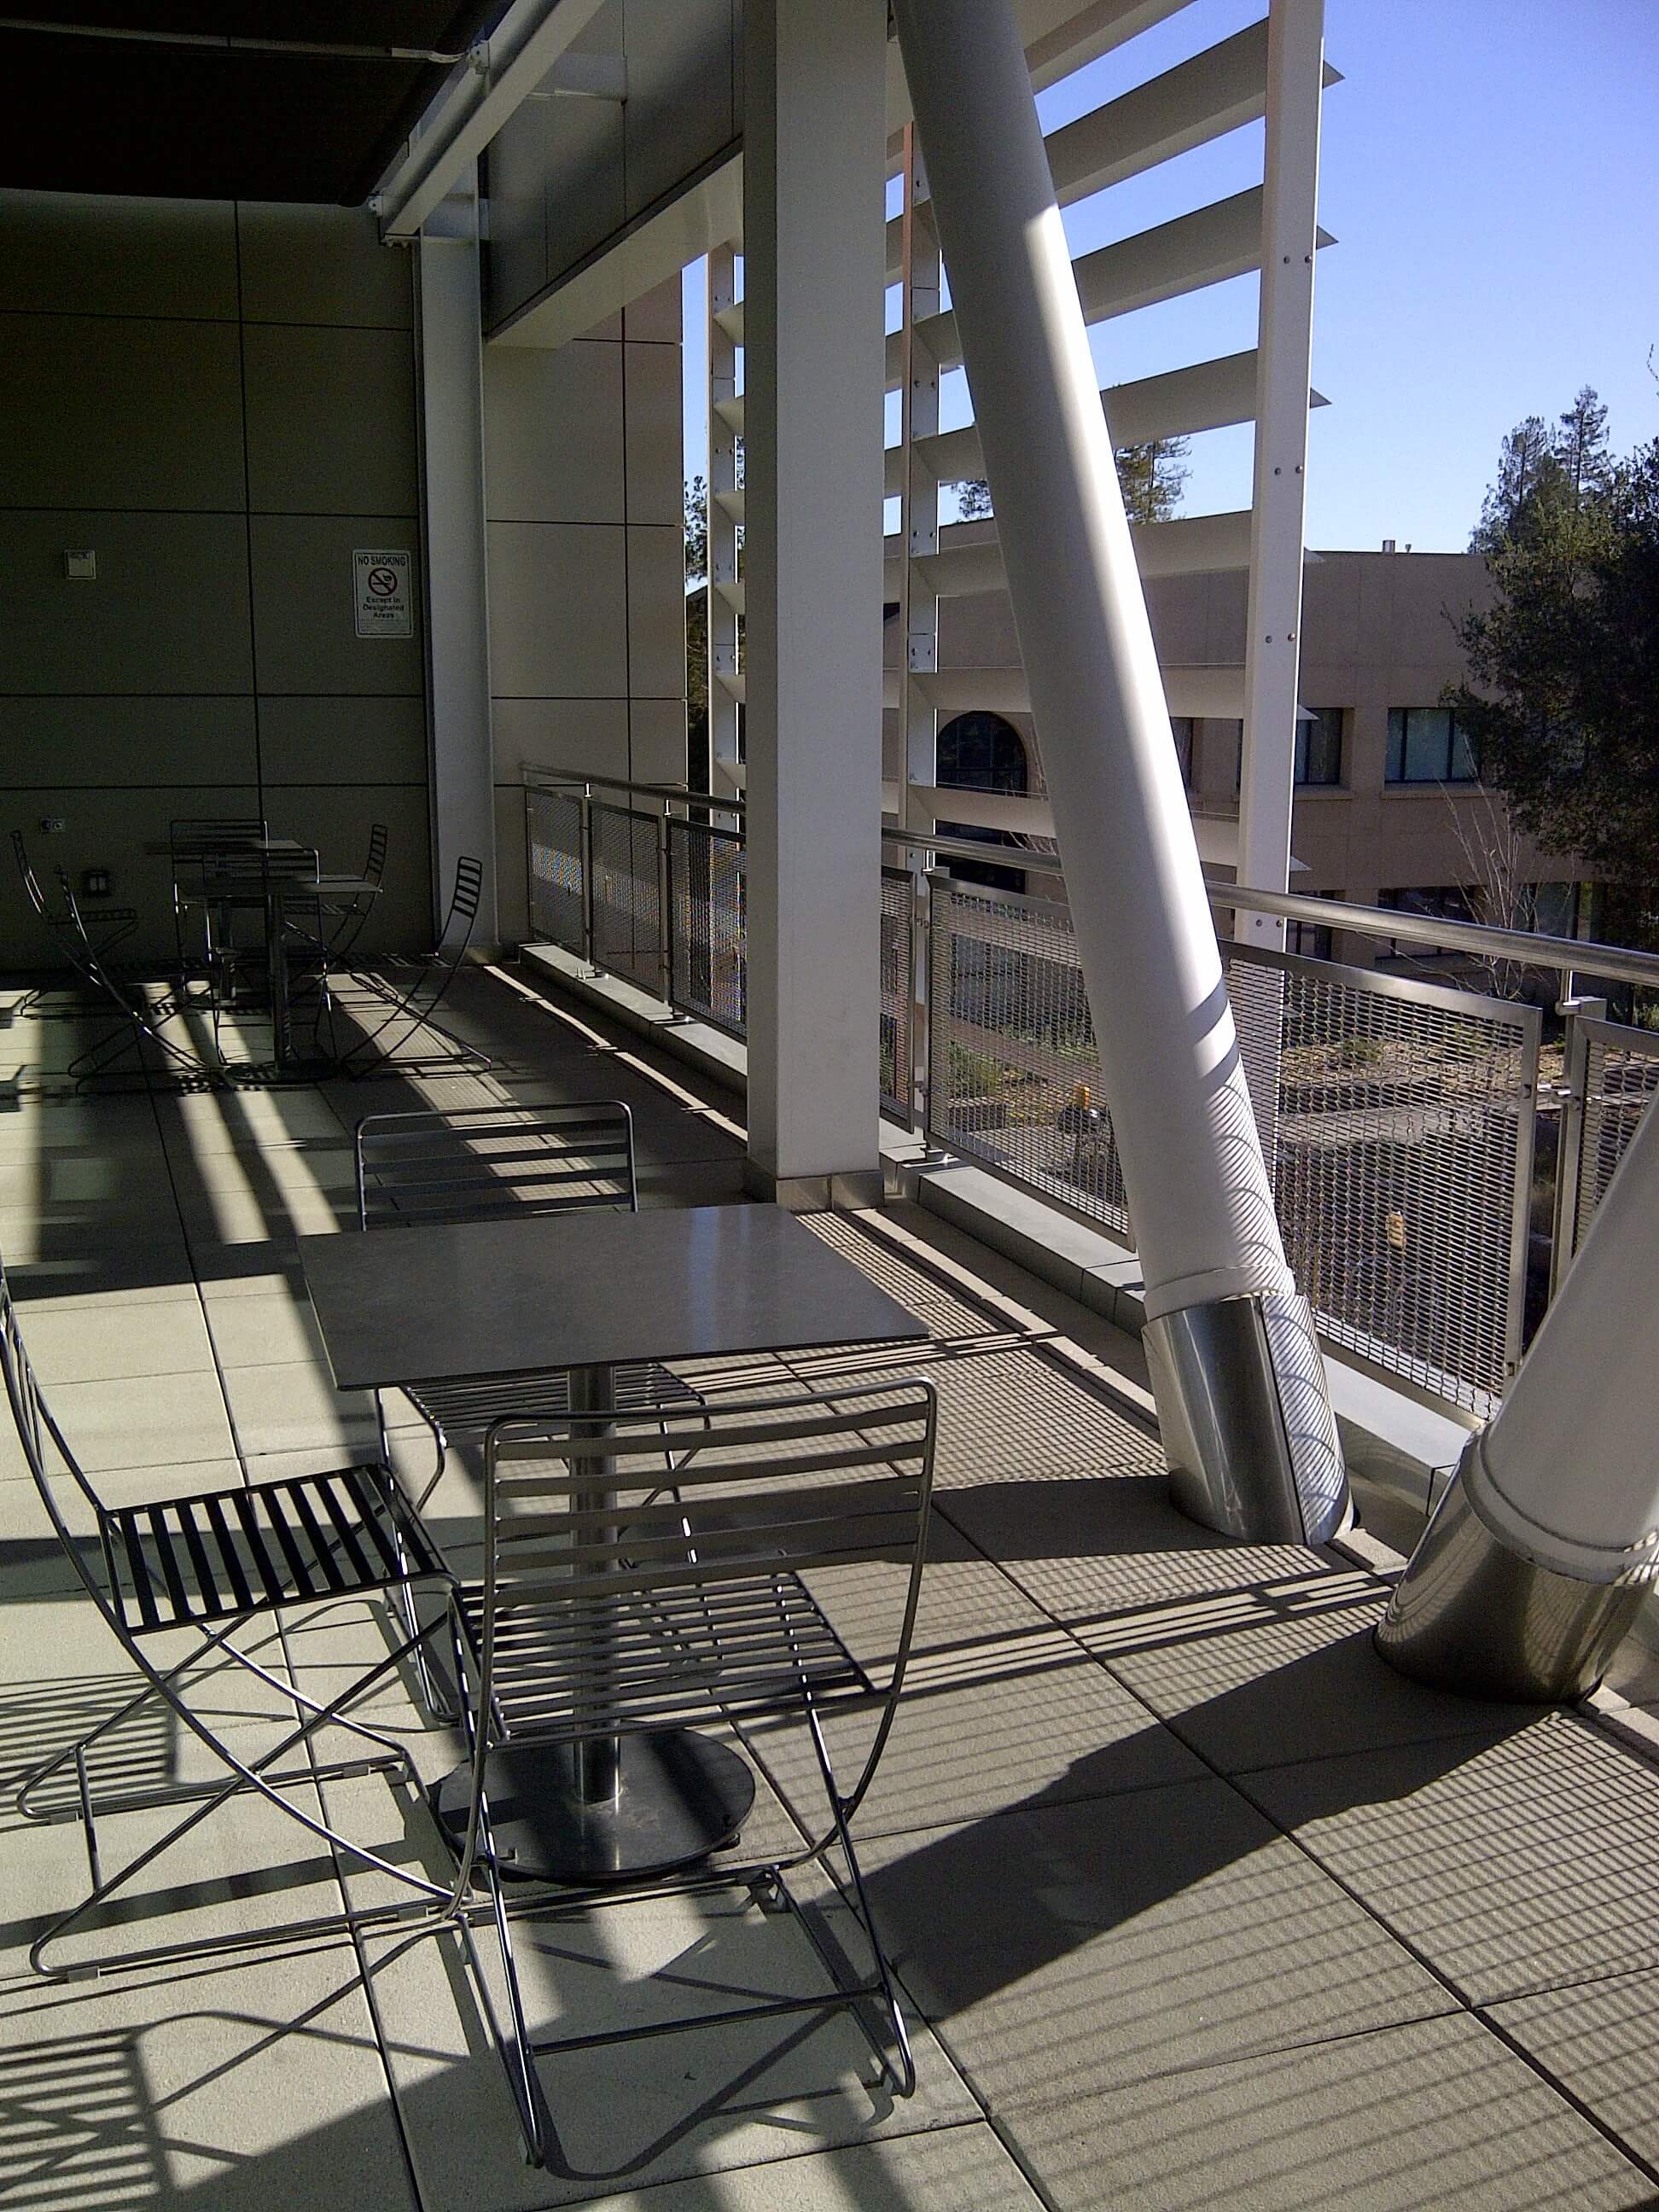 Outdoor Ferric stainless steel guardrail installation at De Anza College, CA.